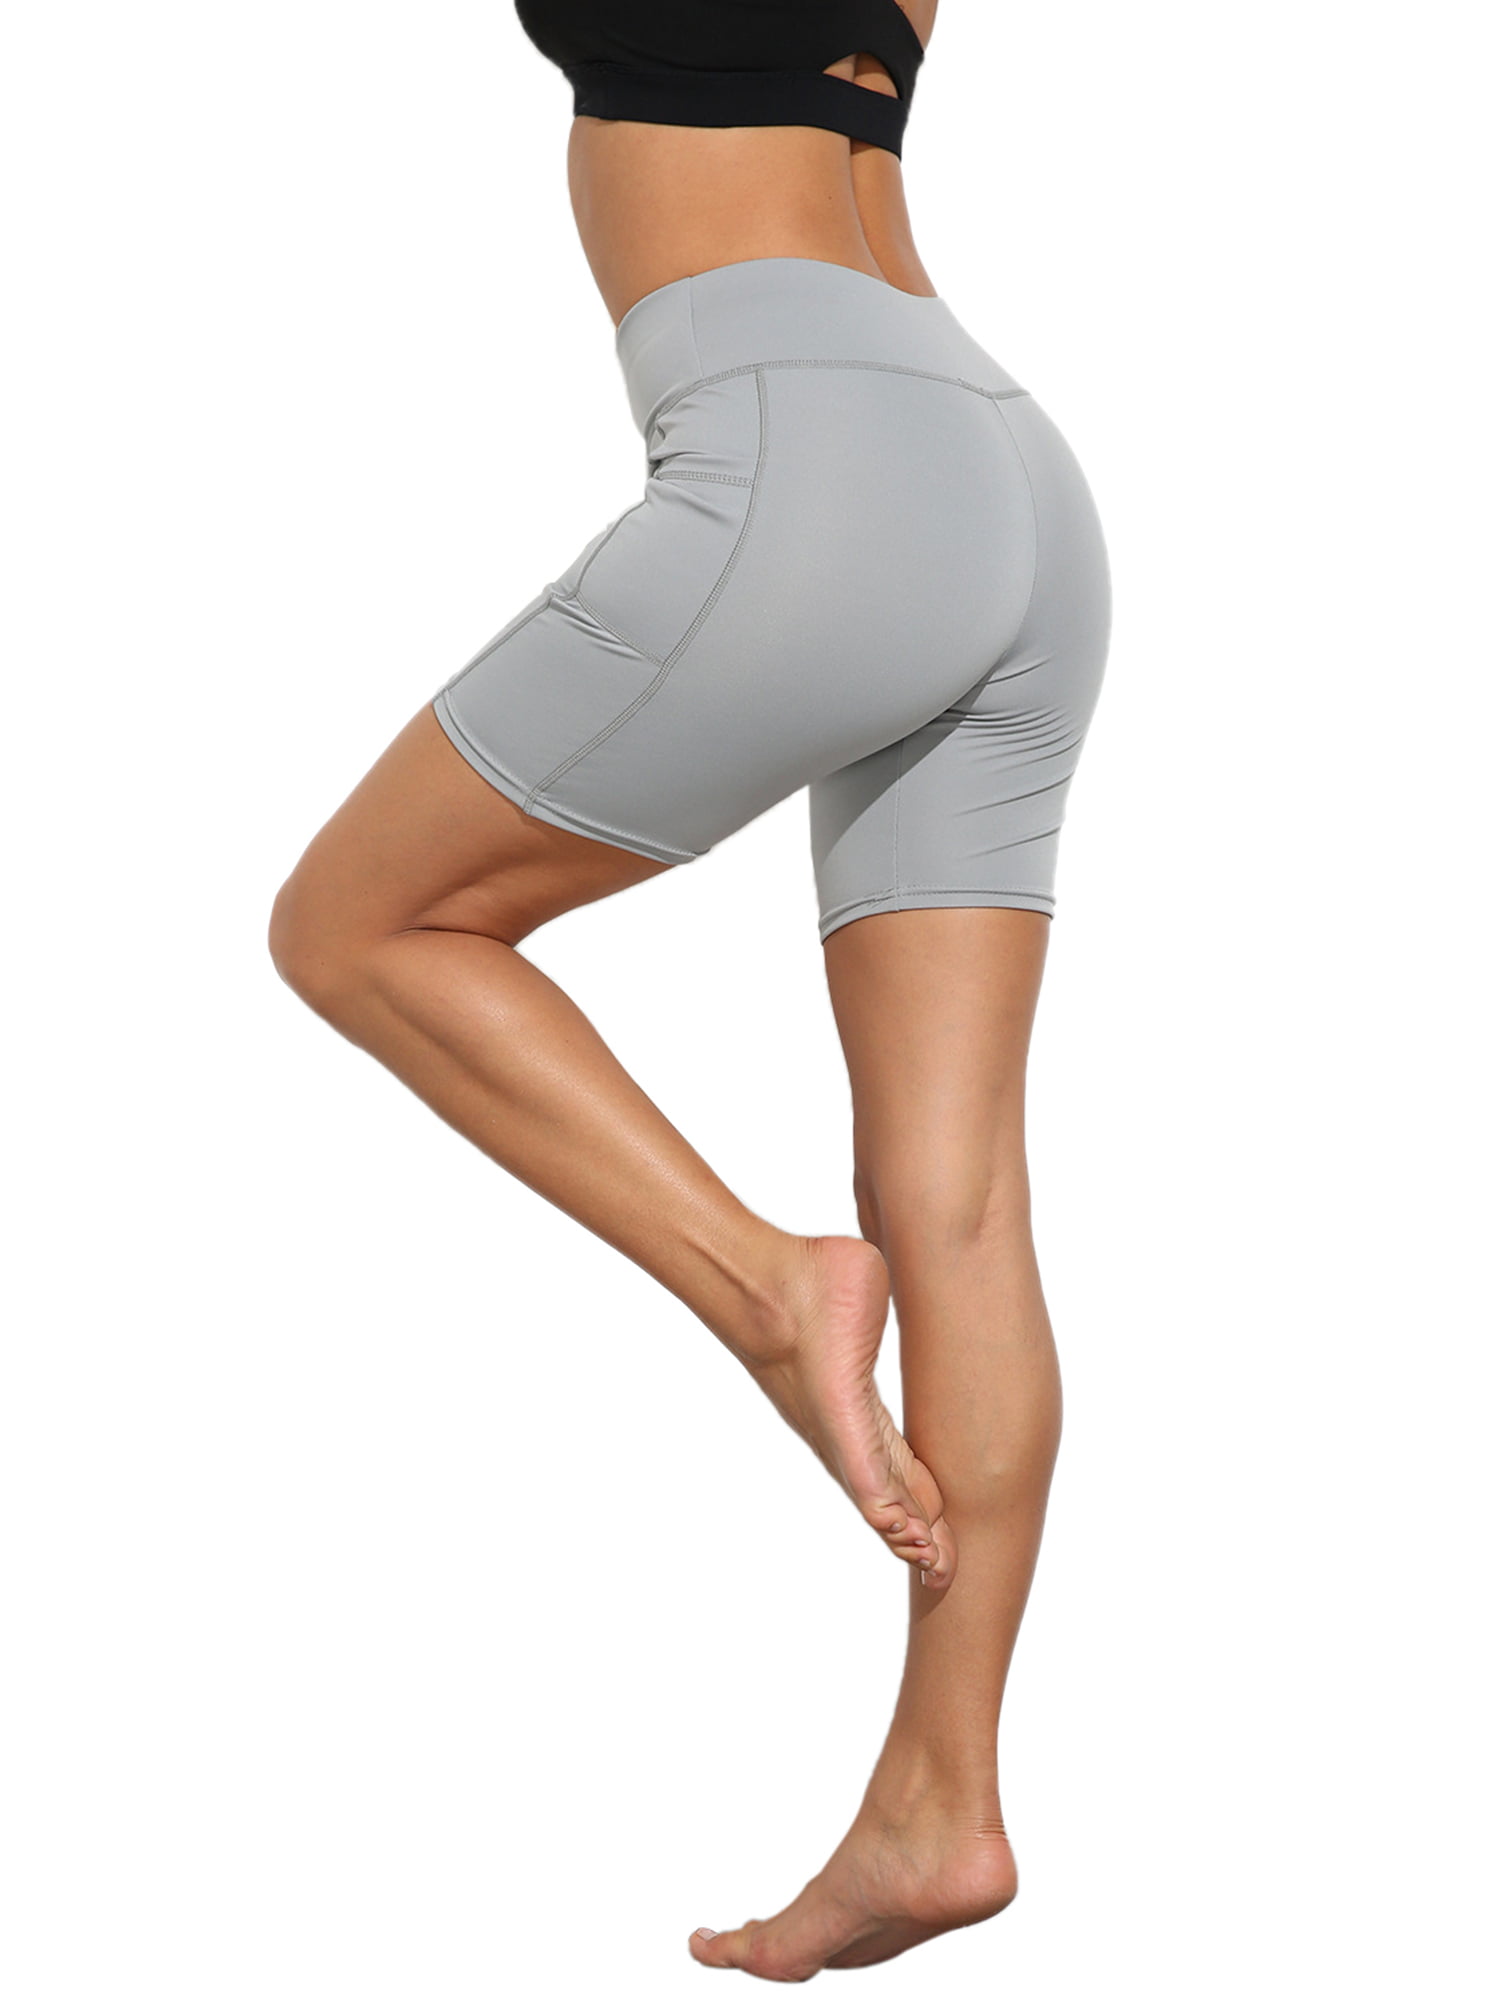 Details about   Womens High Waist Pocket Fitness Sports Shorts Running Training Yoga Hot Pants